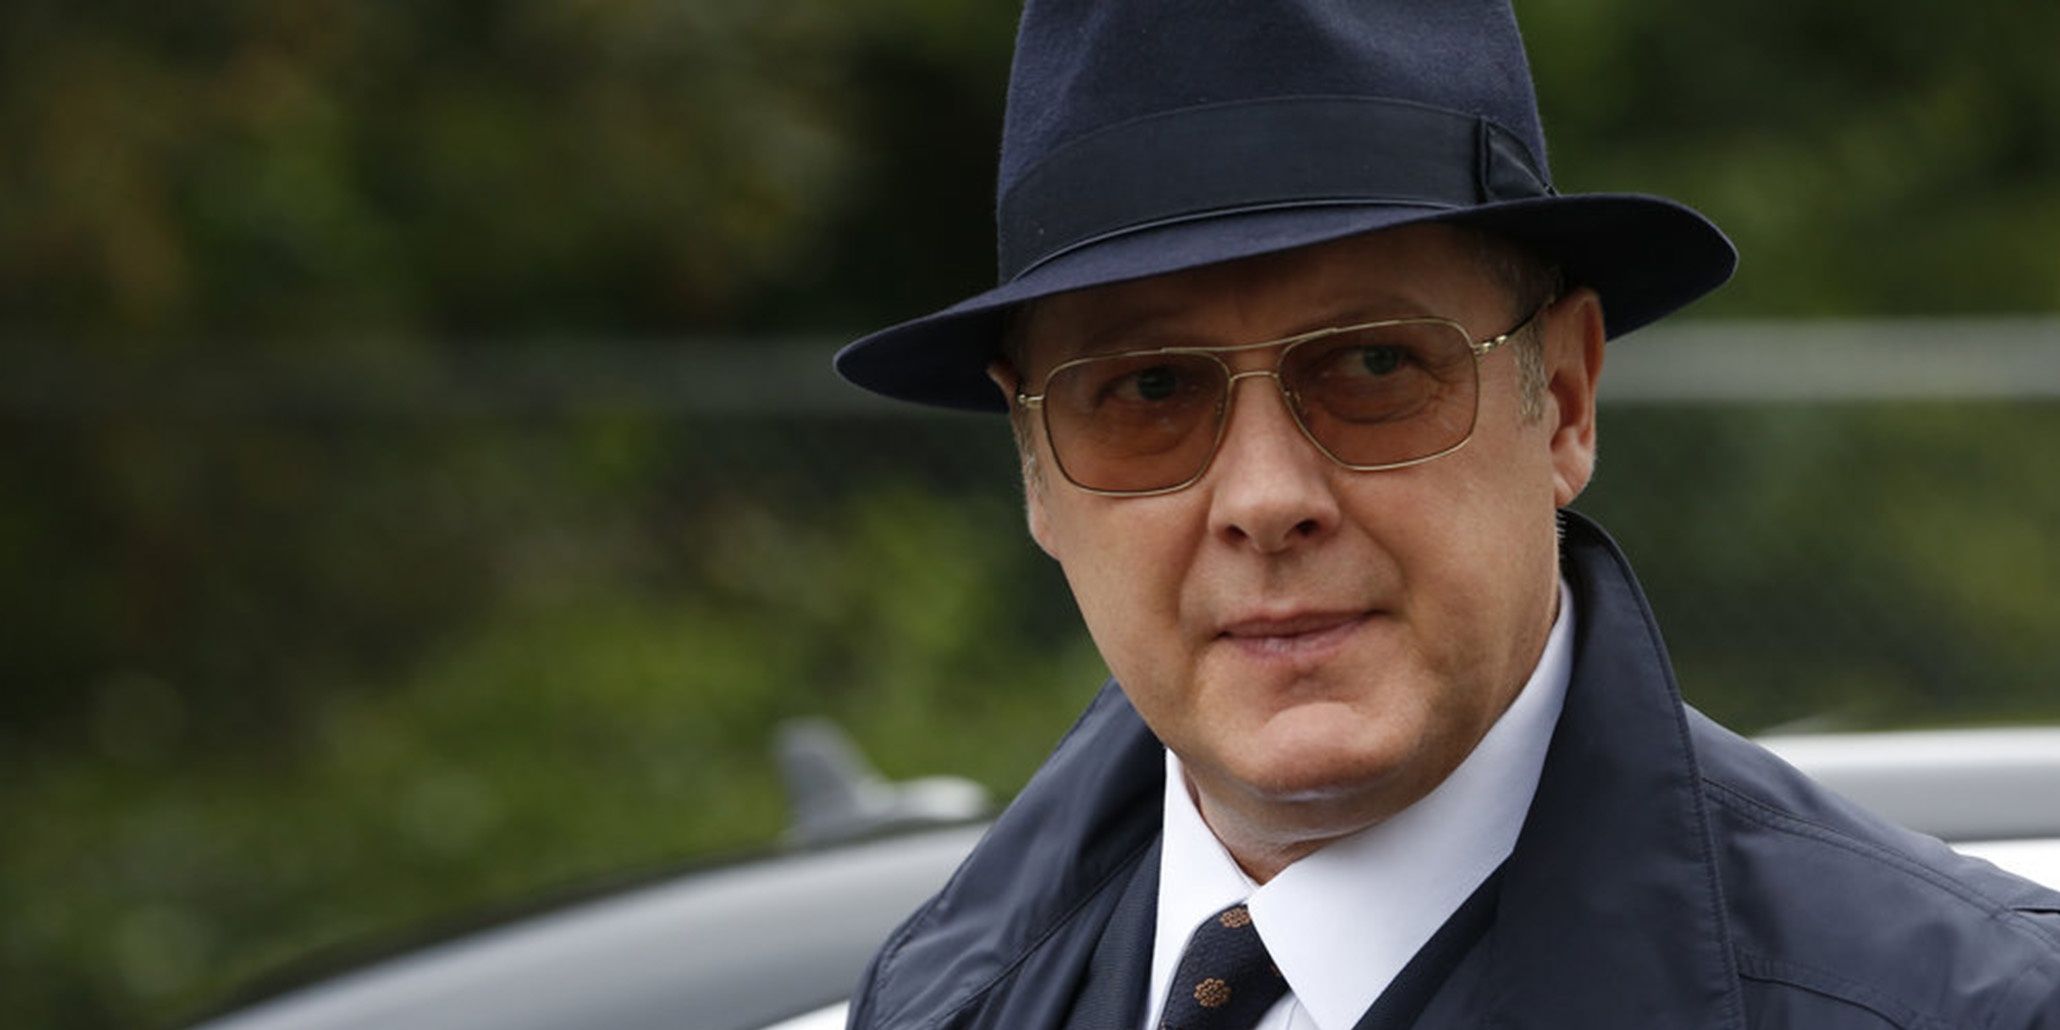 James Spader as Raymond 'Red' Reddington in The Blacklist wearing a top hat and sunglasses